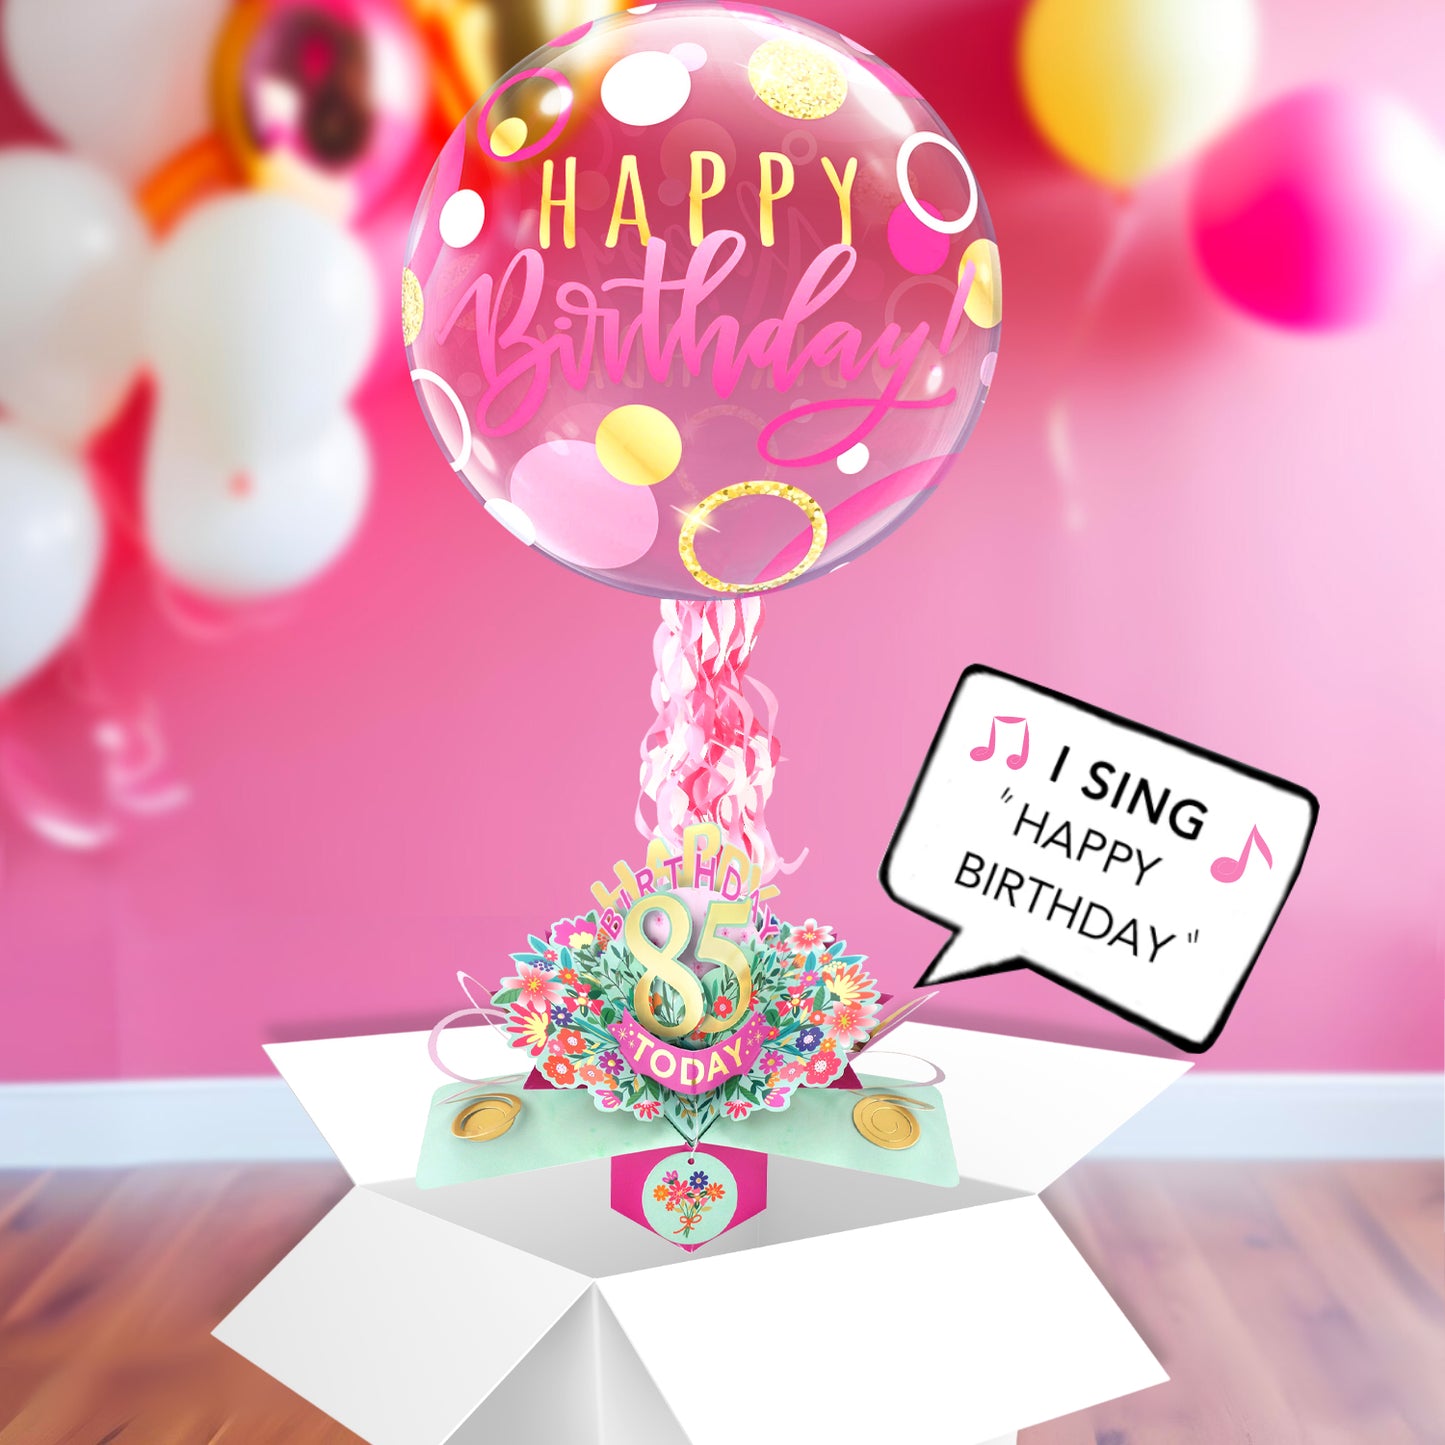 85th Birthday Pop Up Card & Musical Balloon Surprise Delivered In A Box For Her